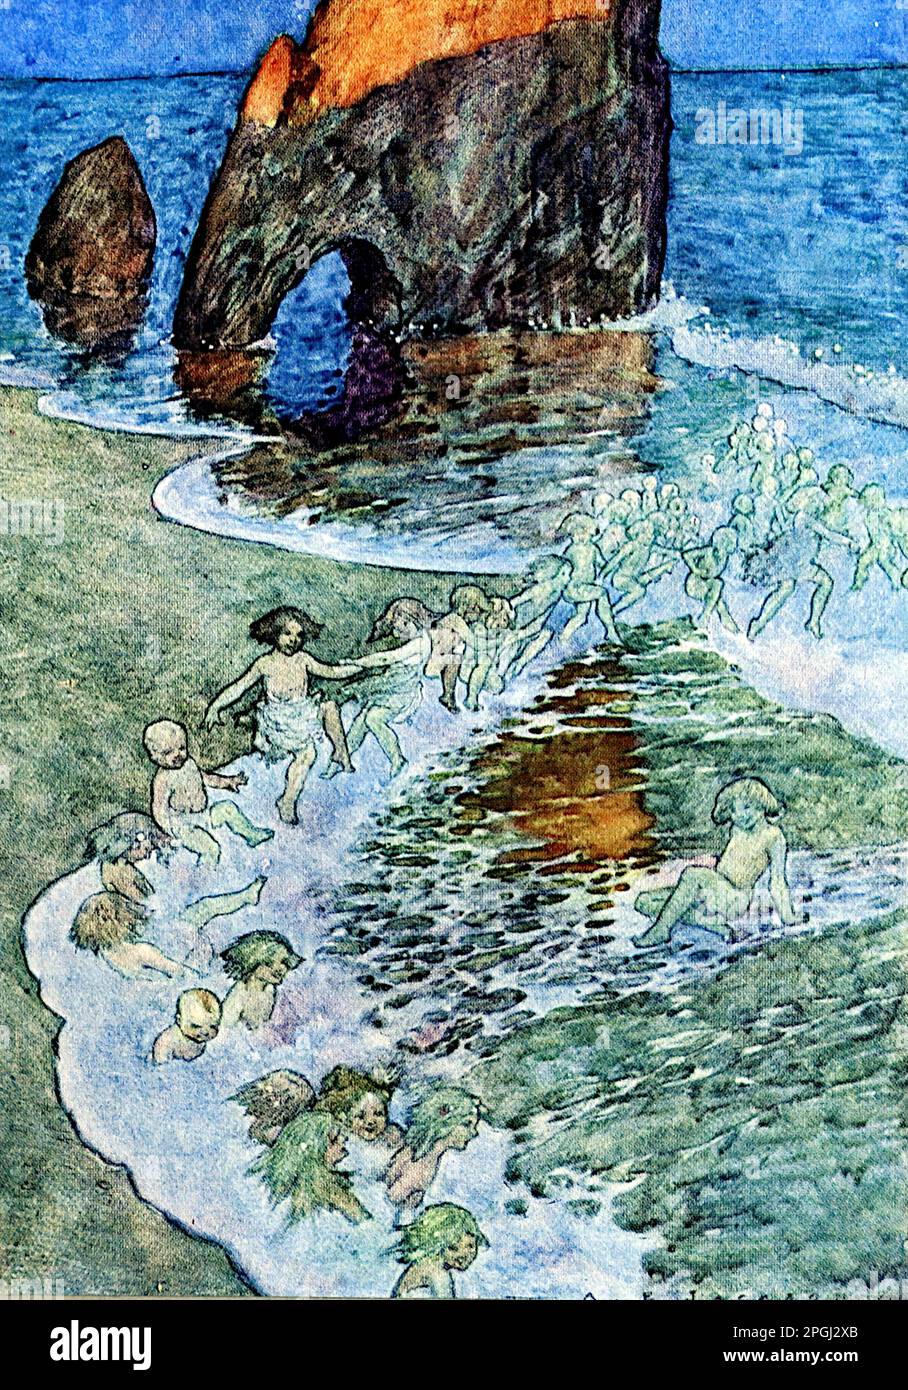 They Put Him In the Middle, from The Water Babies by Charles Kingsley and illustrated by A.E. Jackson. Published by Humphrey Milford, c1900s. Stock Photo